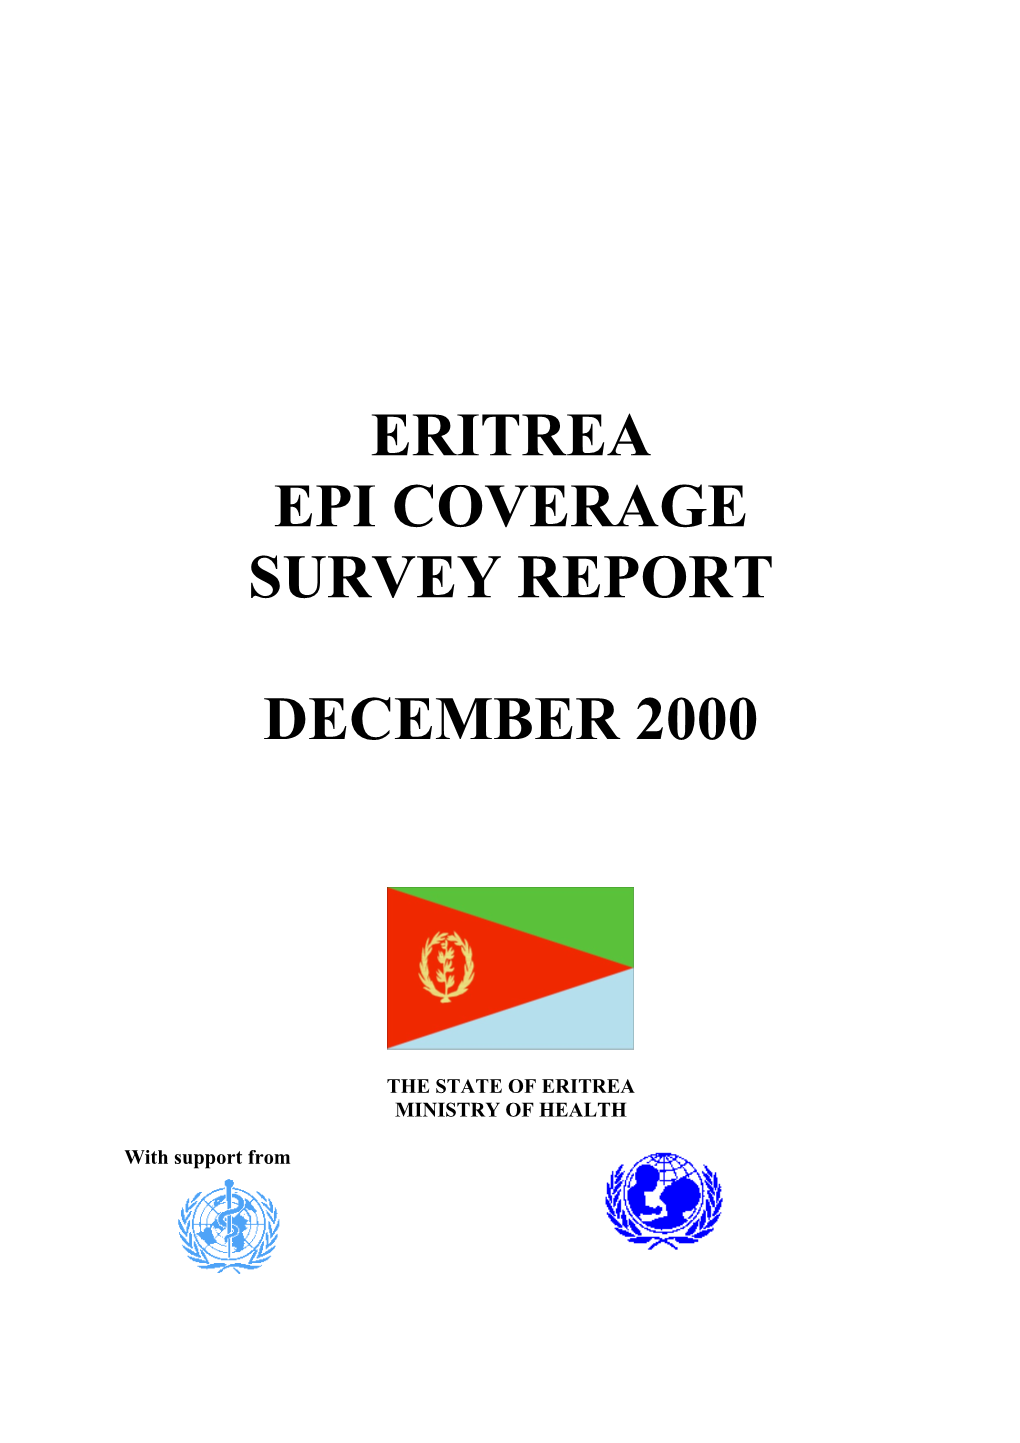 The State of Eritrea